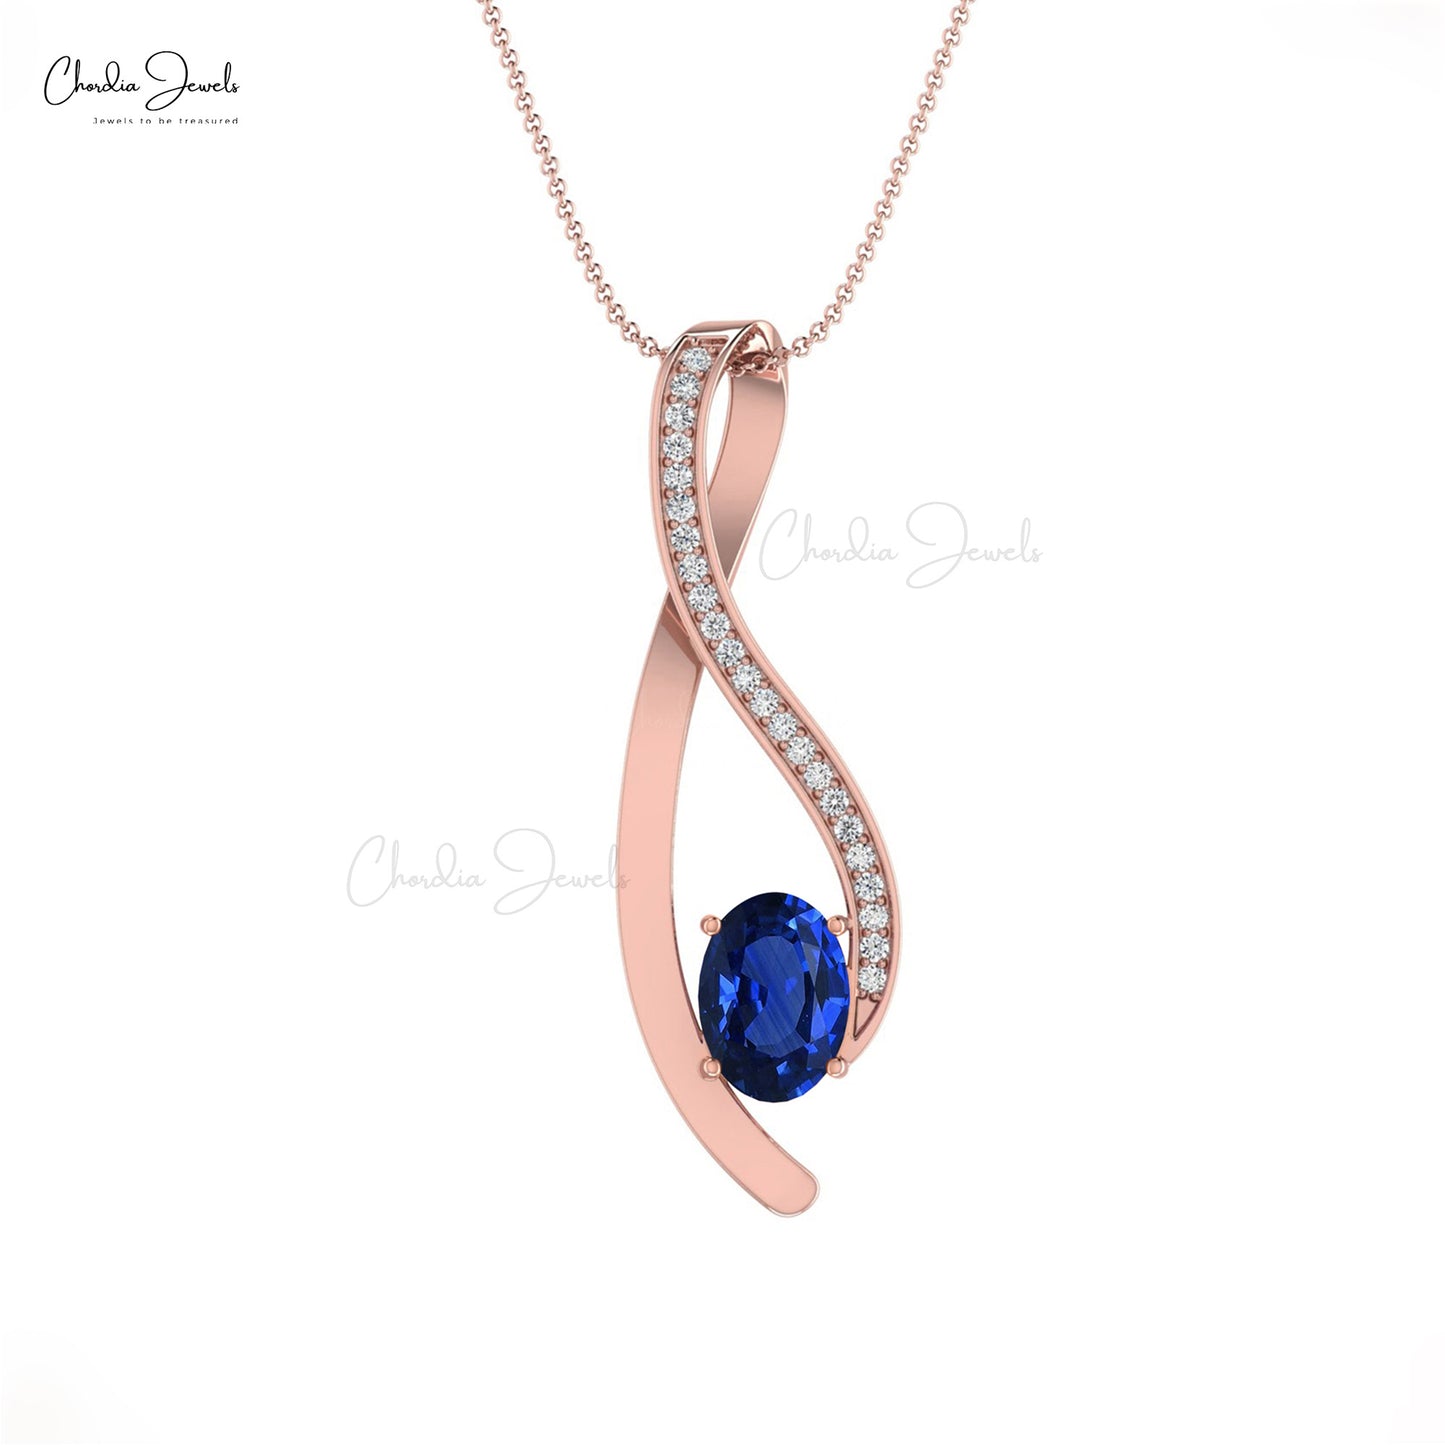 Real 14k Gold Pave Set White Diamond Overlay Curve Pendant Necklace 6x4 Oval Cut Genuine Blue Sapphire Gemstone Light Weight Jewelry For Wedding Gift